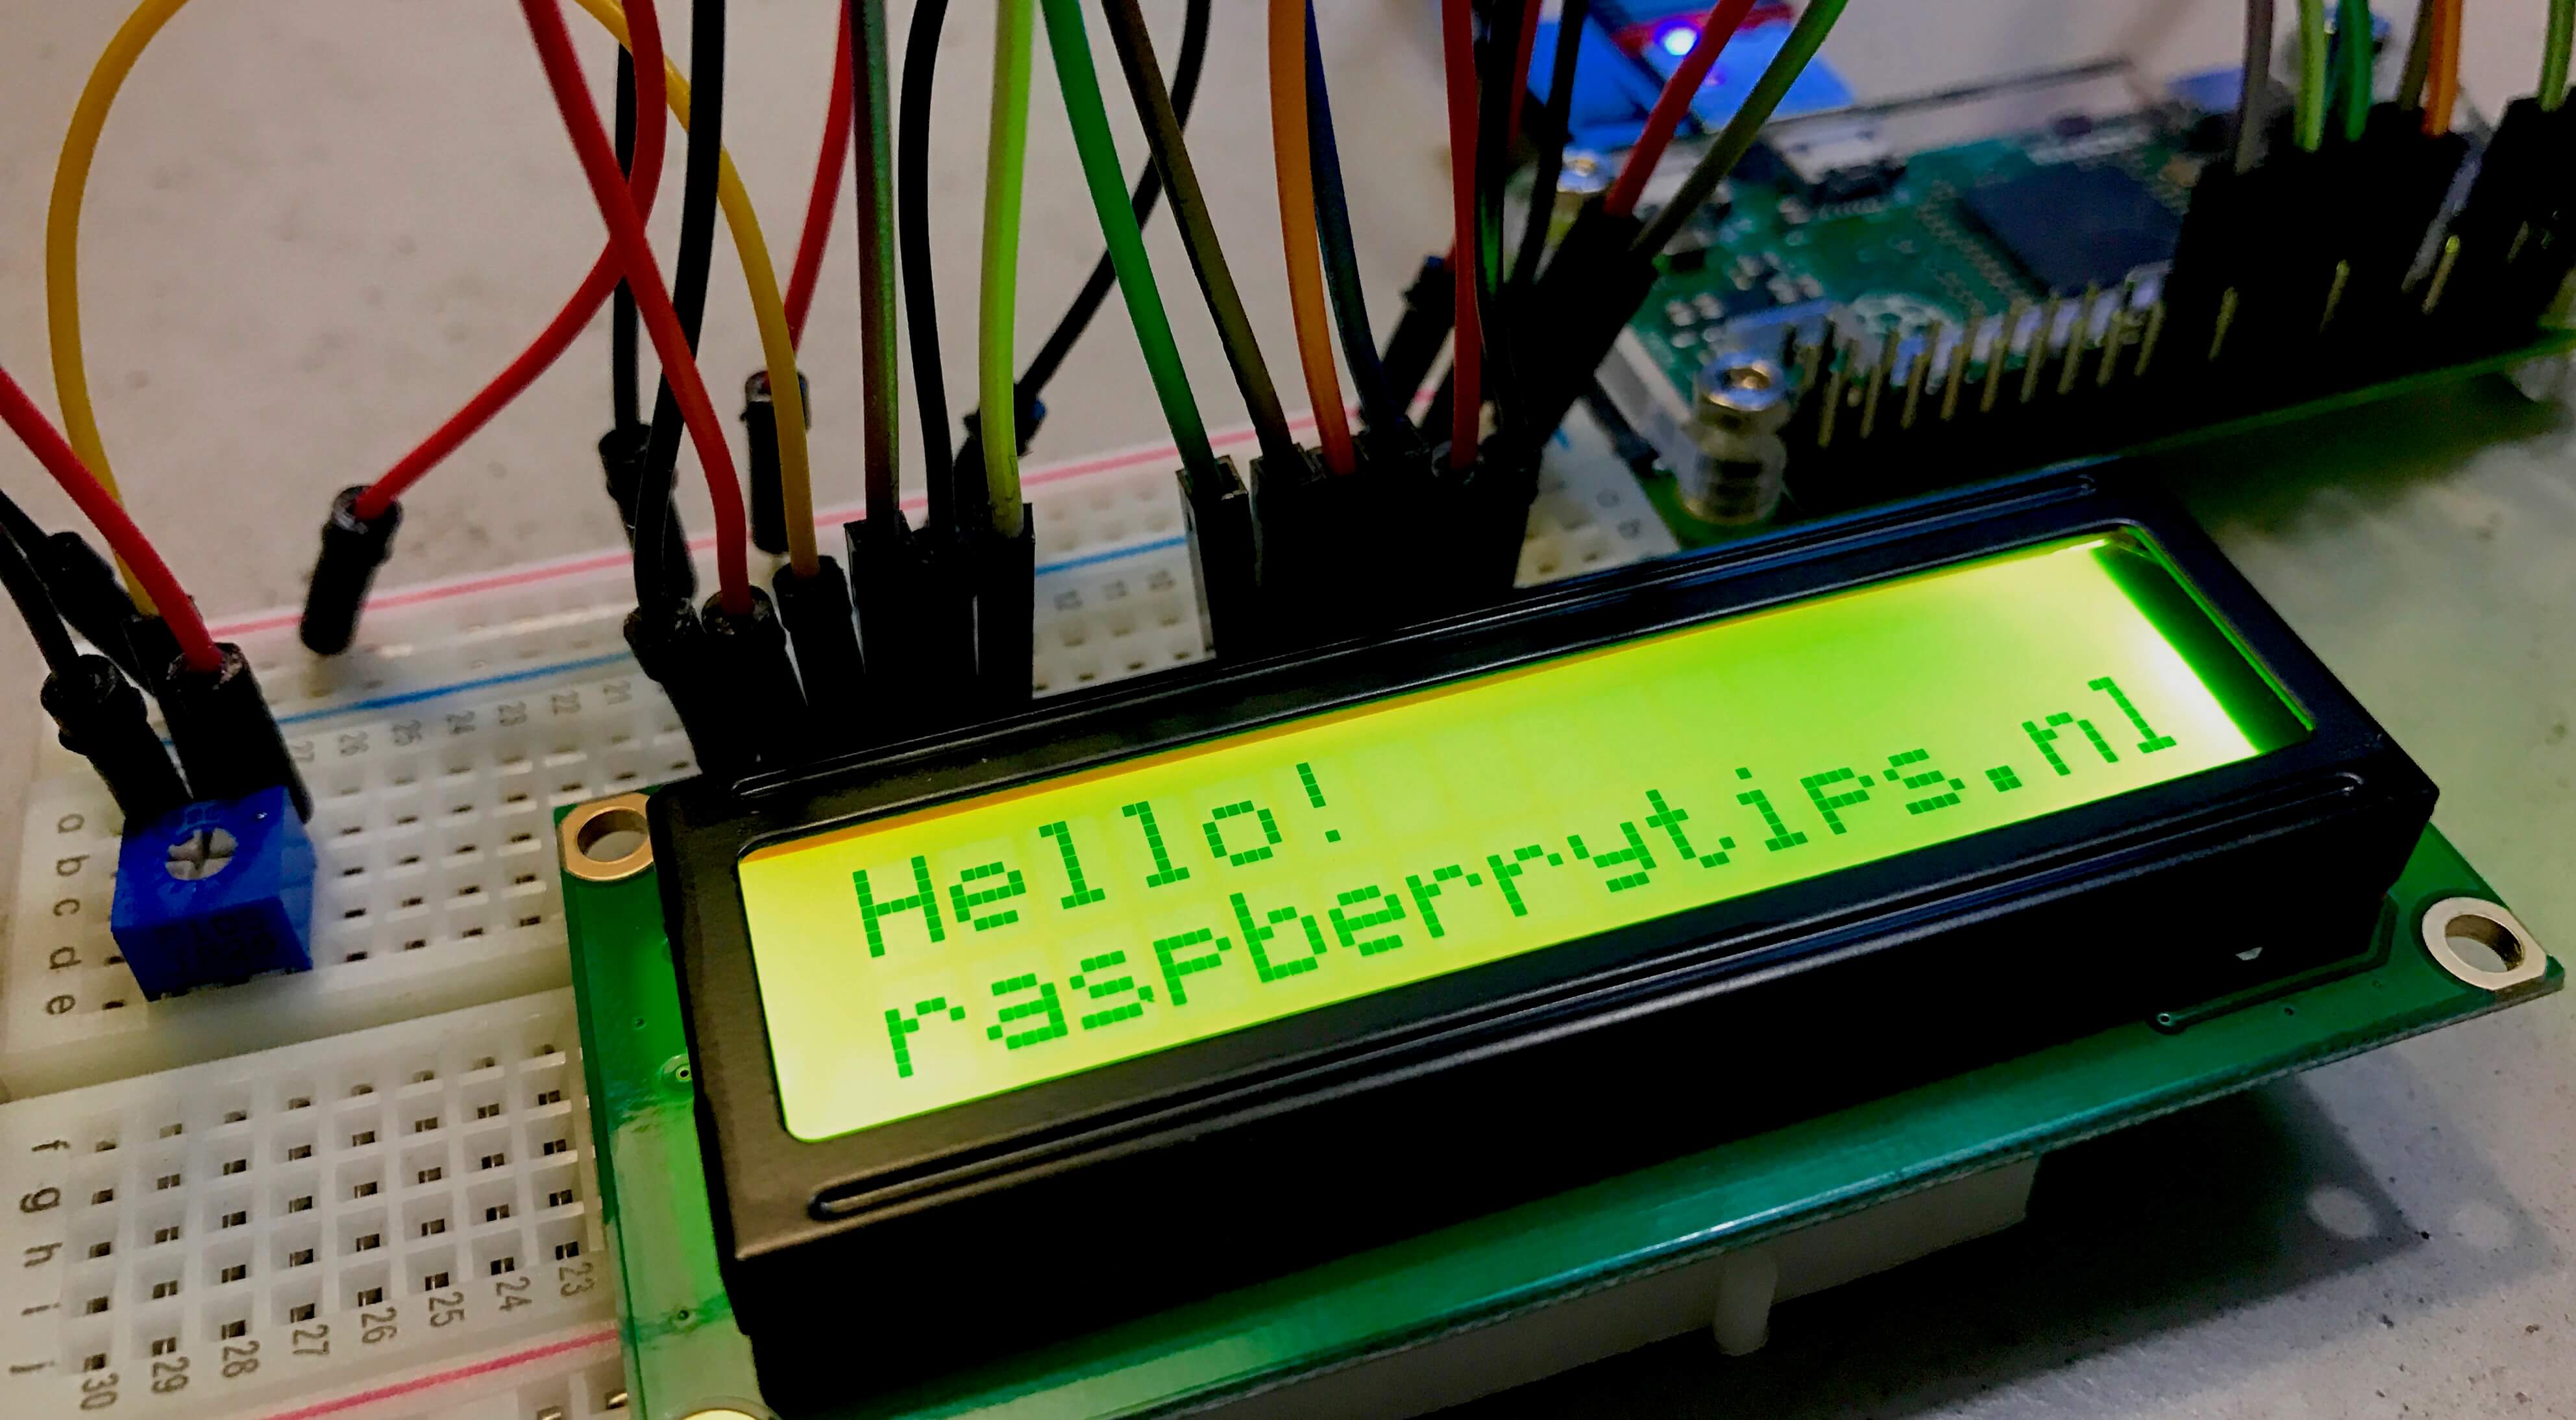 I2c 16 X 2 Lcd Display With Raspberry Pi Pico Or W Using Arduino Ide Images 8391